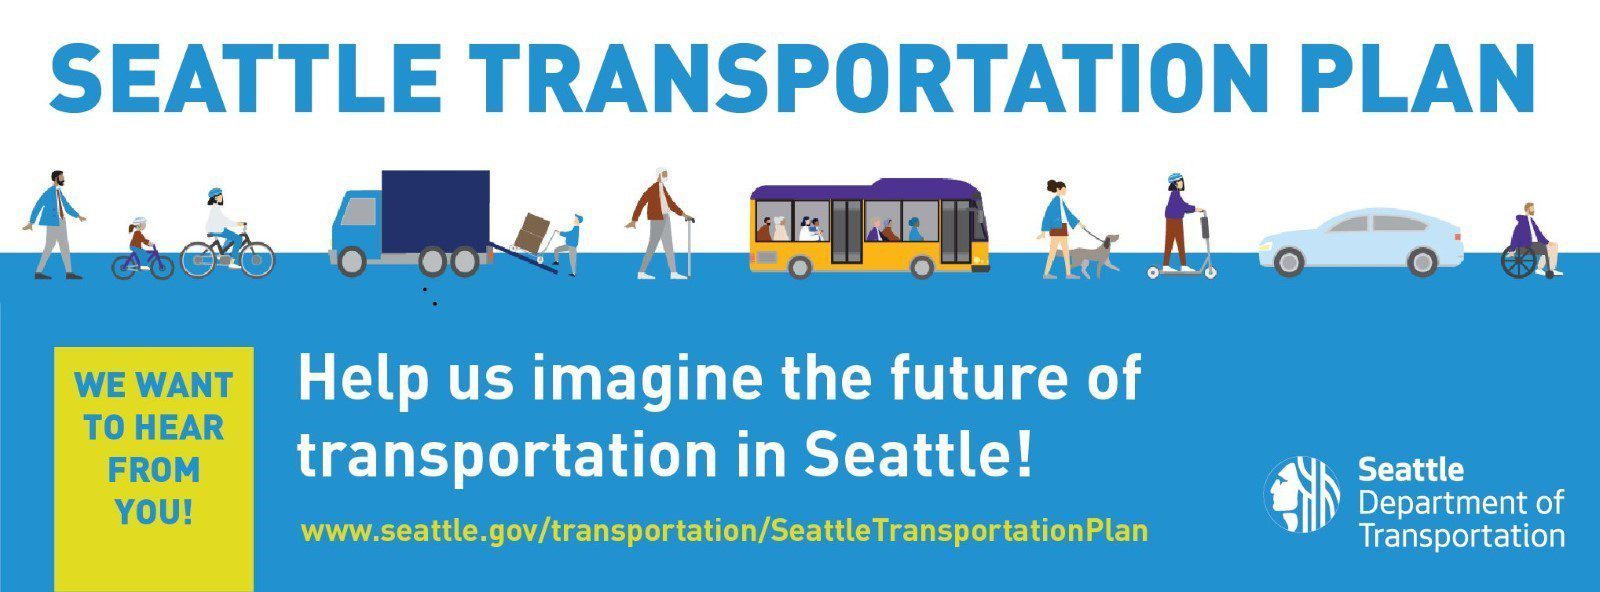 Icon featuring the Seattle Transportation Plan, and requesting members of the public to help us imagine the future of transportation in Seattle.